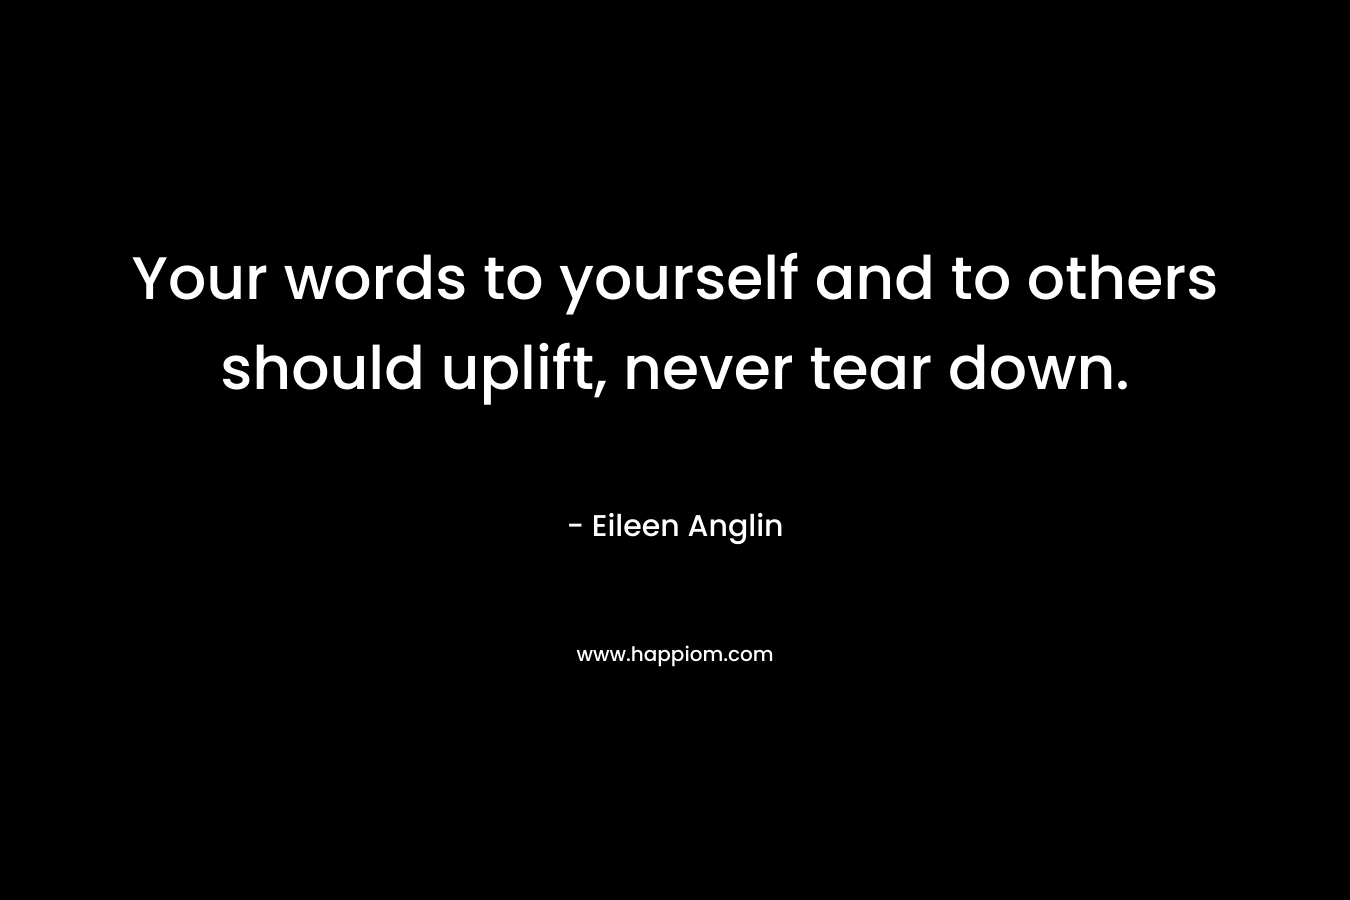 Your words to yourself and to others should uplift, never tear down. – Eileen Anglin